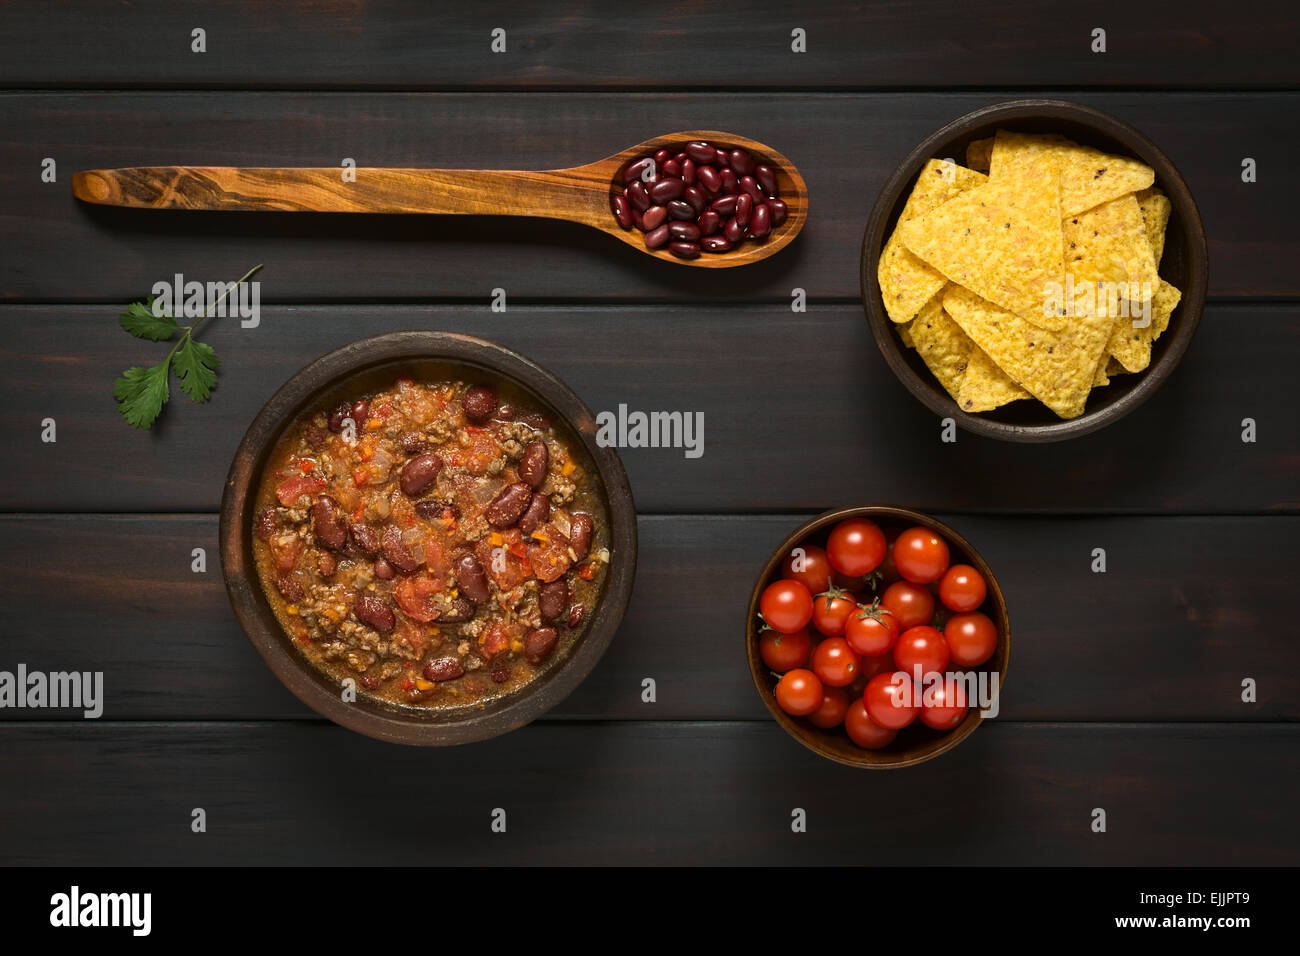 Overhead shot of chili con carne and tortilla chips with ingredients dried kidney beans and cherry tomatoes Stock Photo